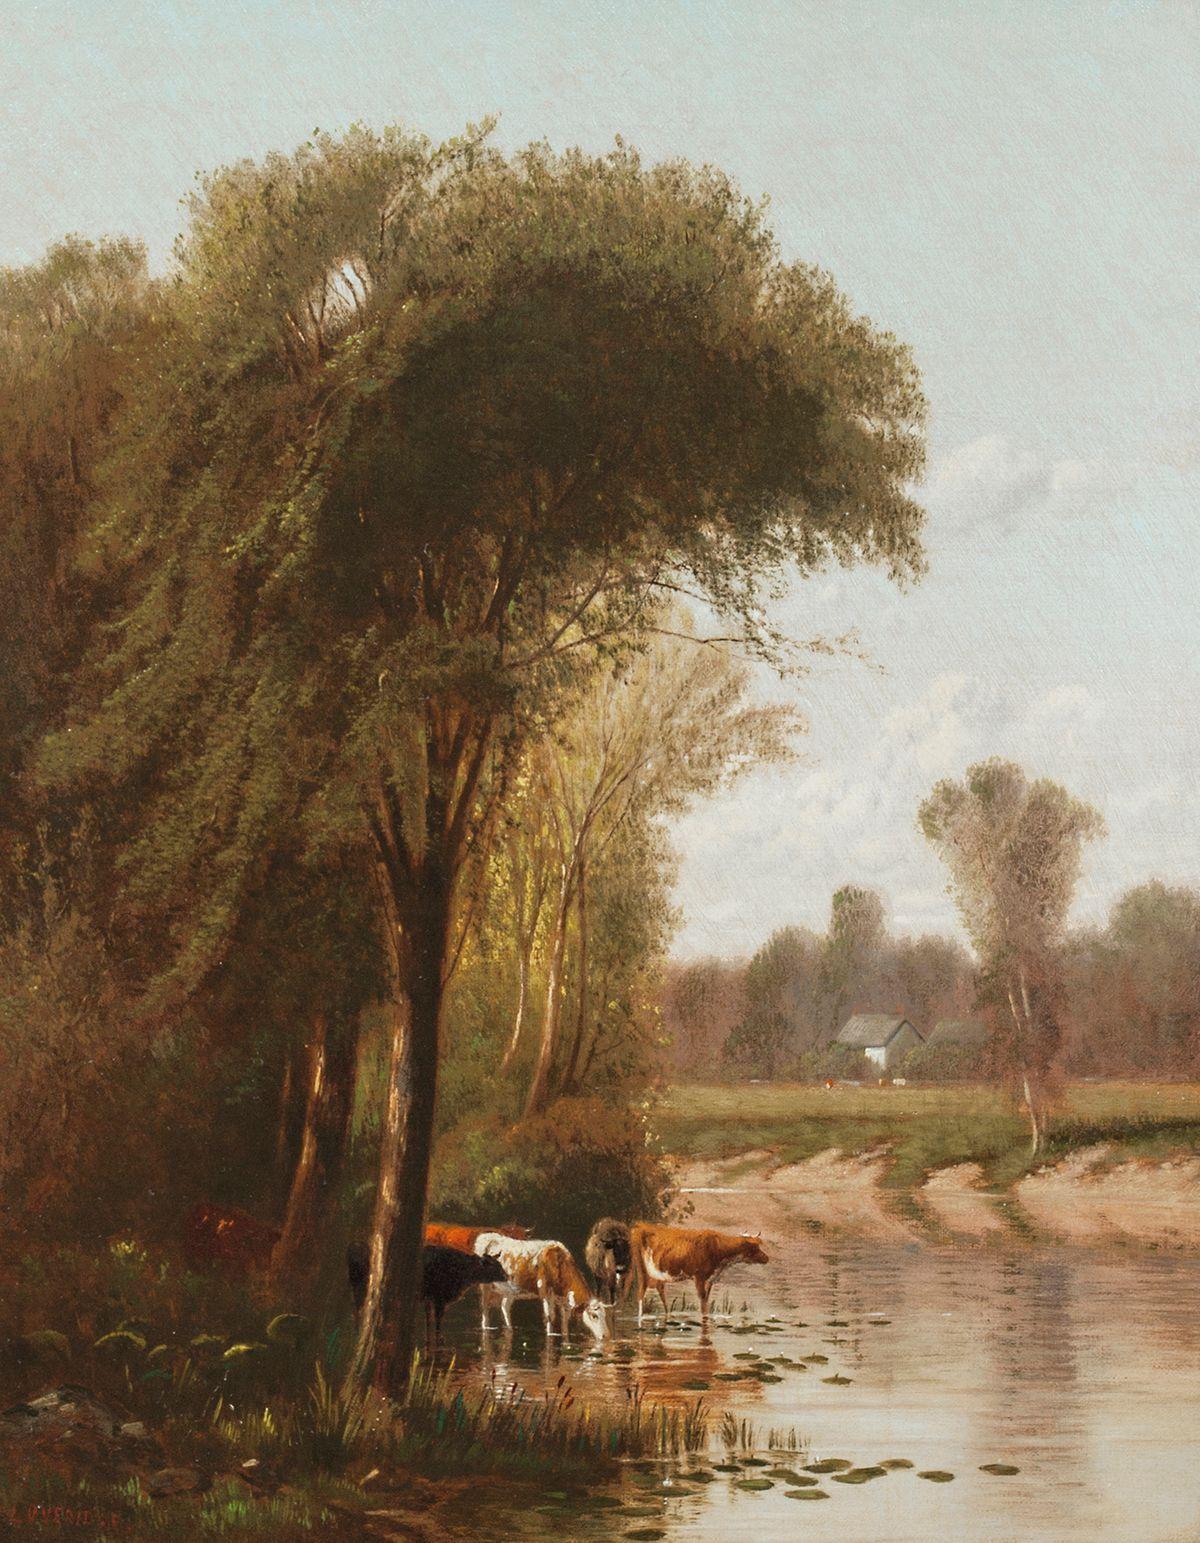 Hudson River School landscape of with cows by American artist, Clinton Loveridge

CLINTON LOVERIDGE (1824-1915)
Idyllic Landscape
Oil on canvas
20 x 16 inches
Signed lower left

Although little is known about the life and career of New York native